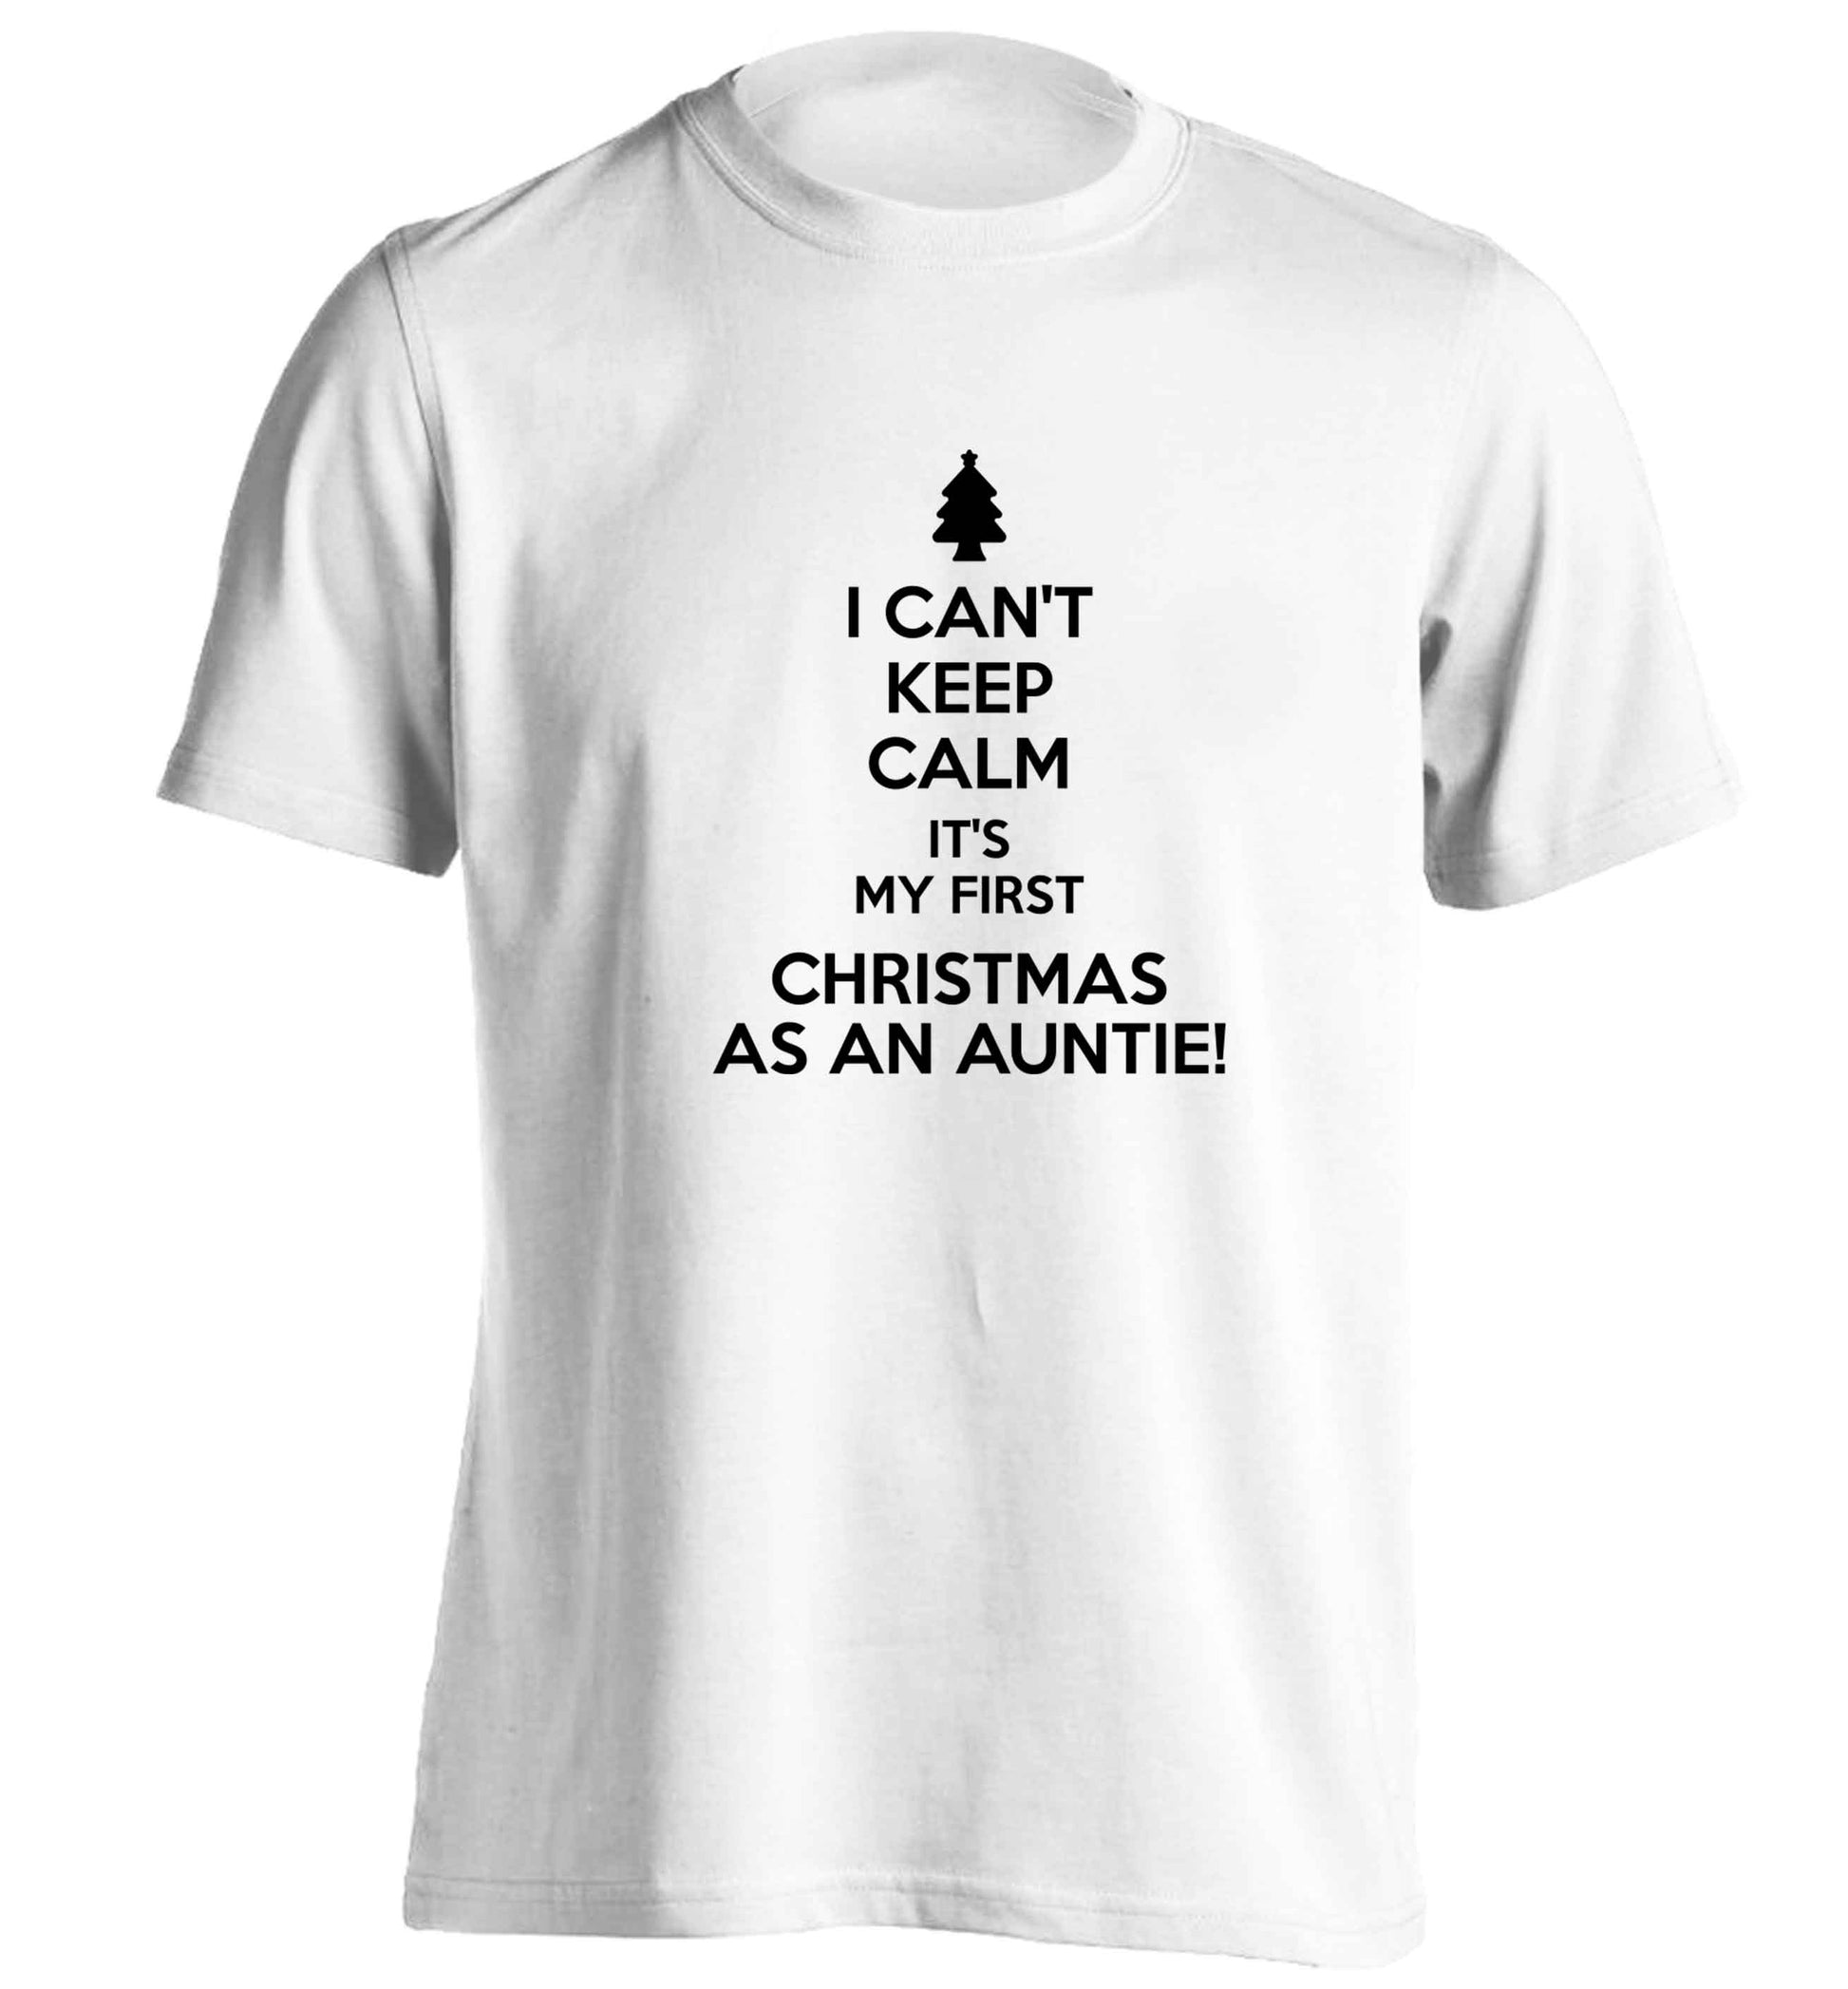 I can't keep calm it's my first Christmas as an auntie! adults unisex white Tshirt 2XL